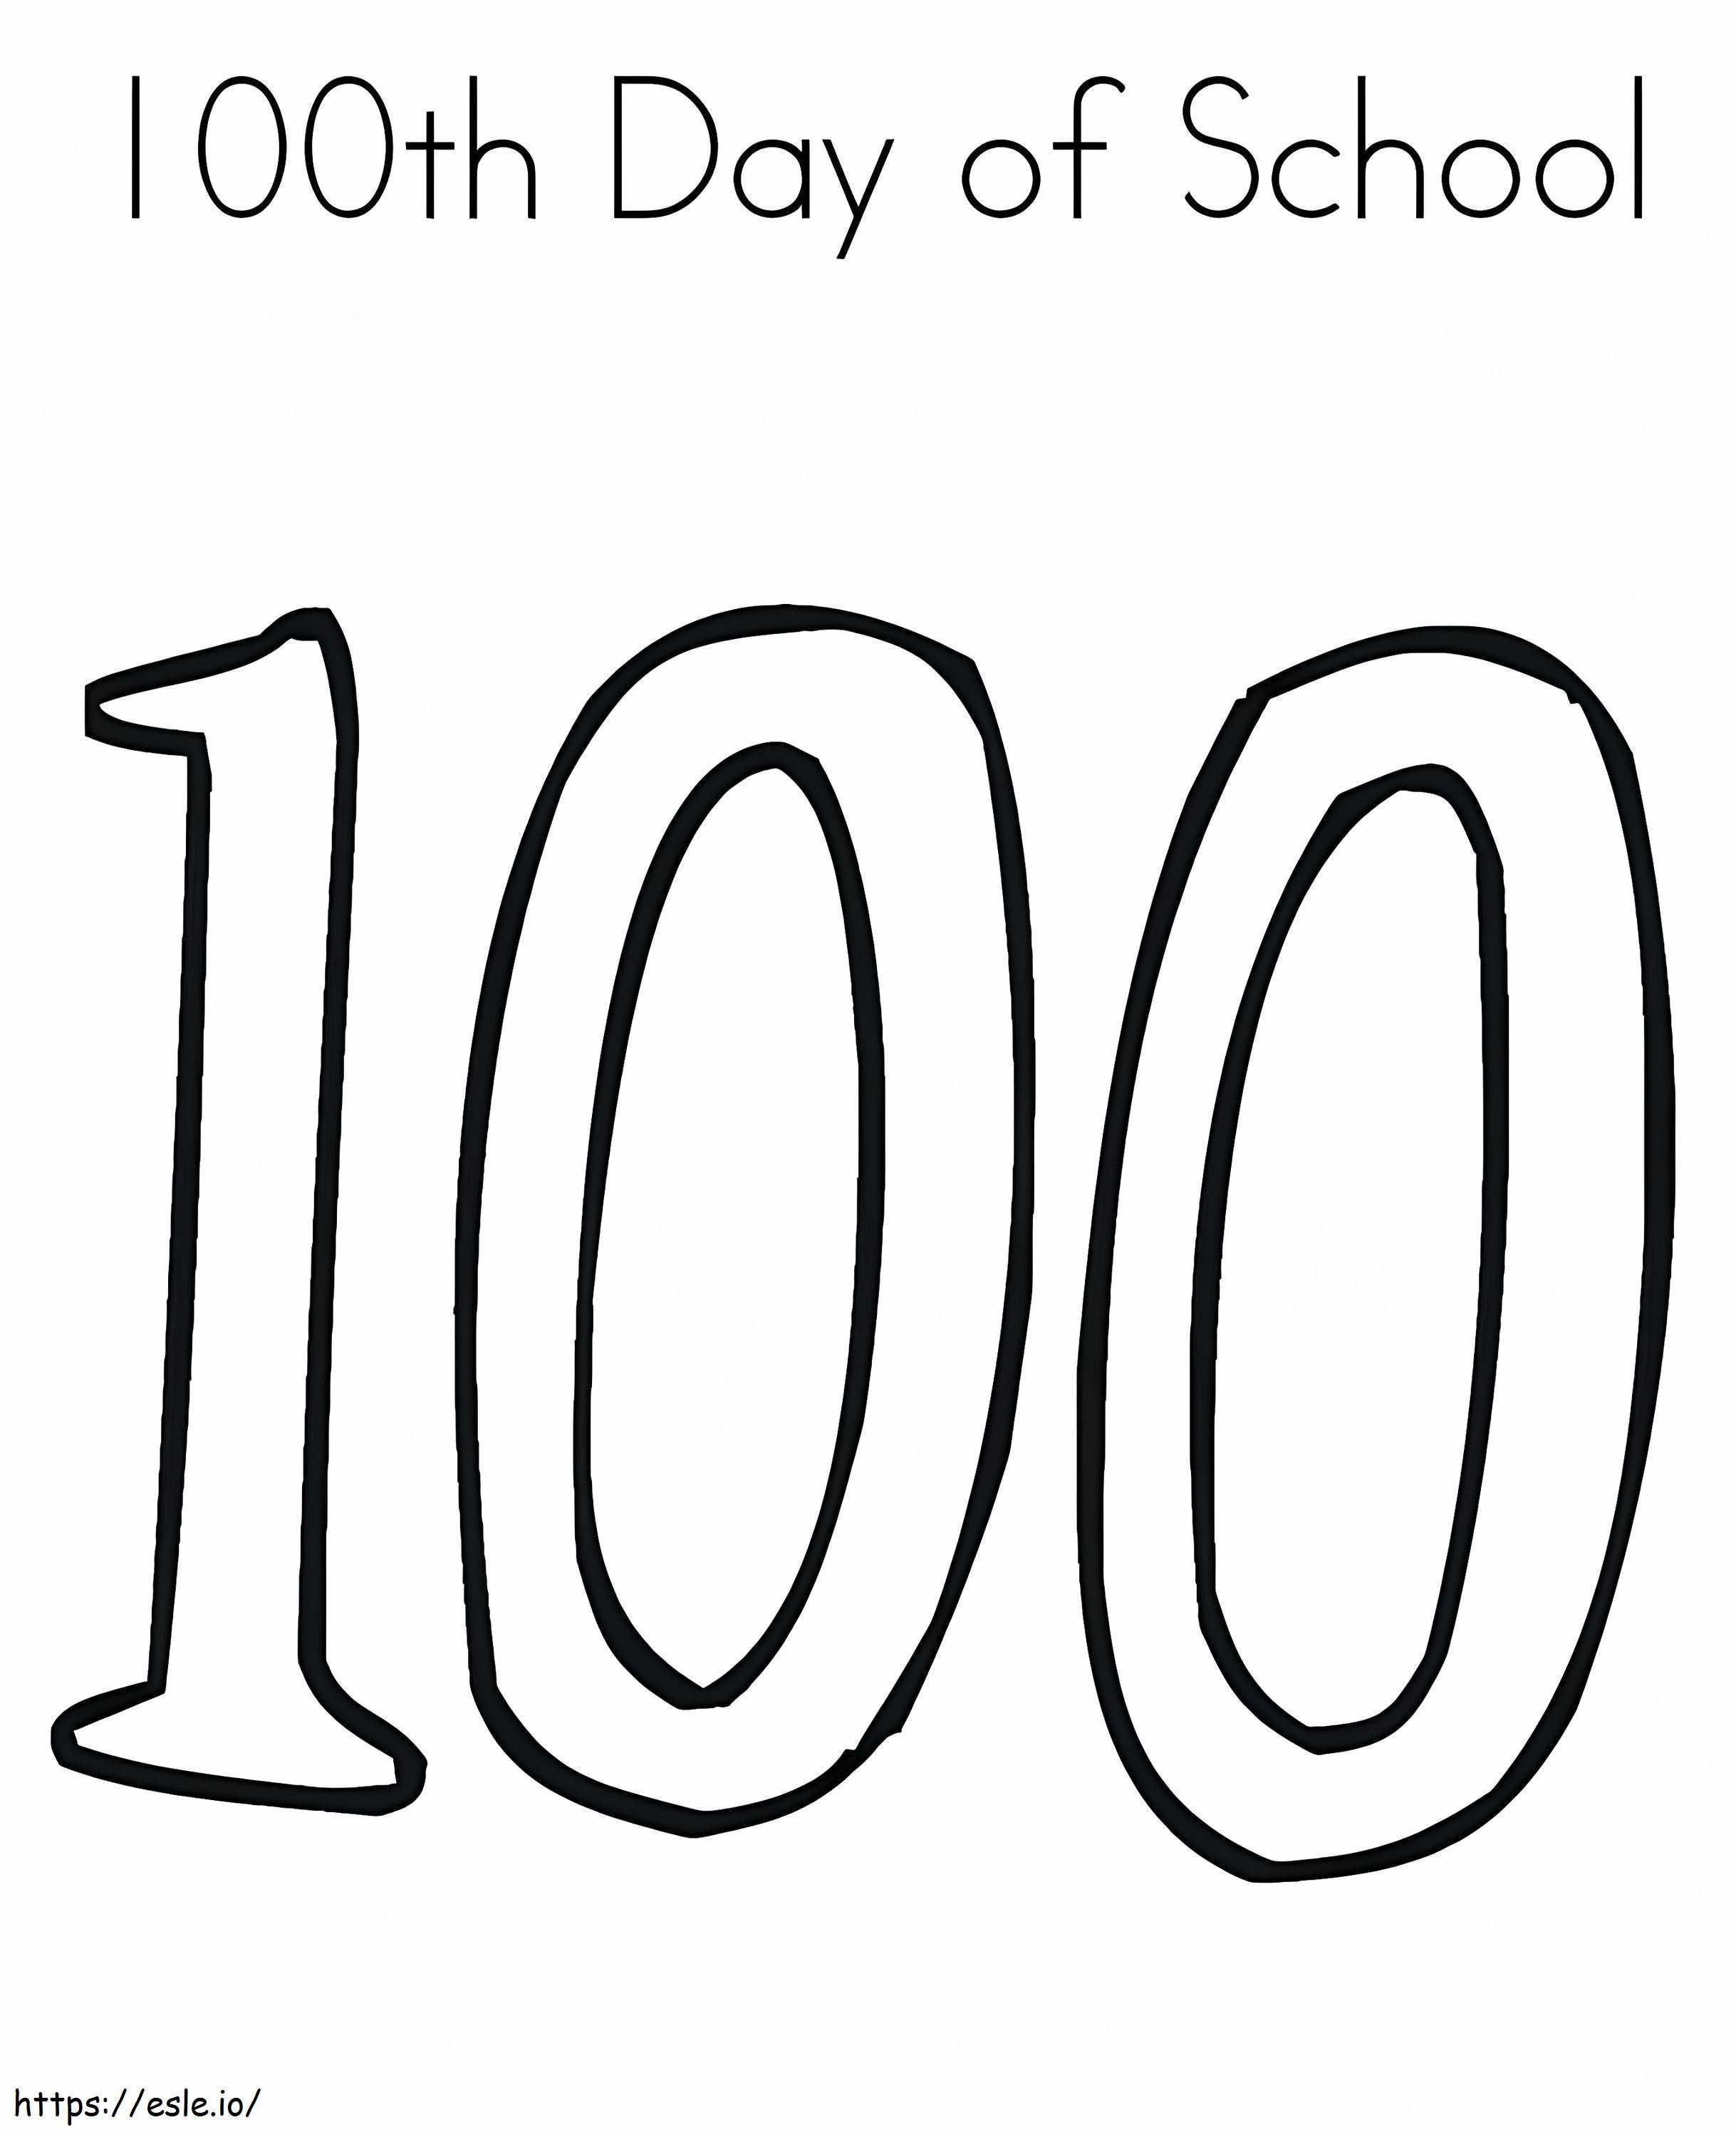 Easy 100Th Day Of School coloring page